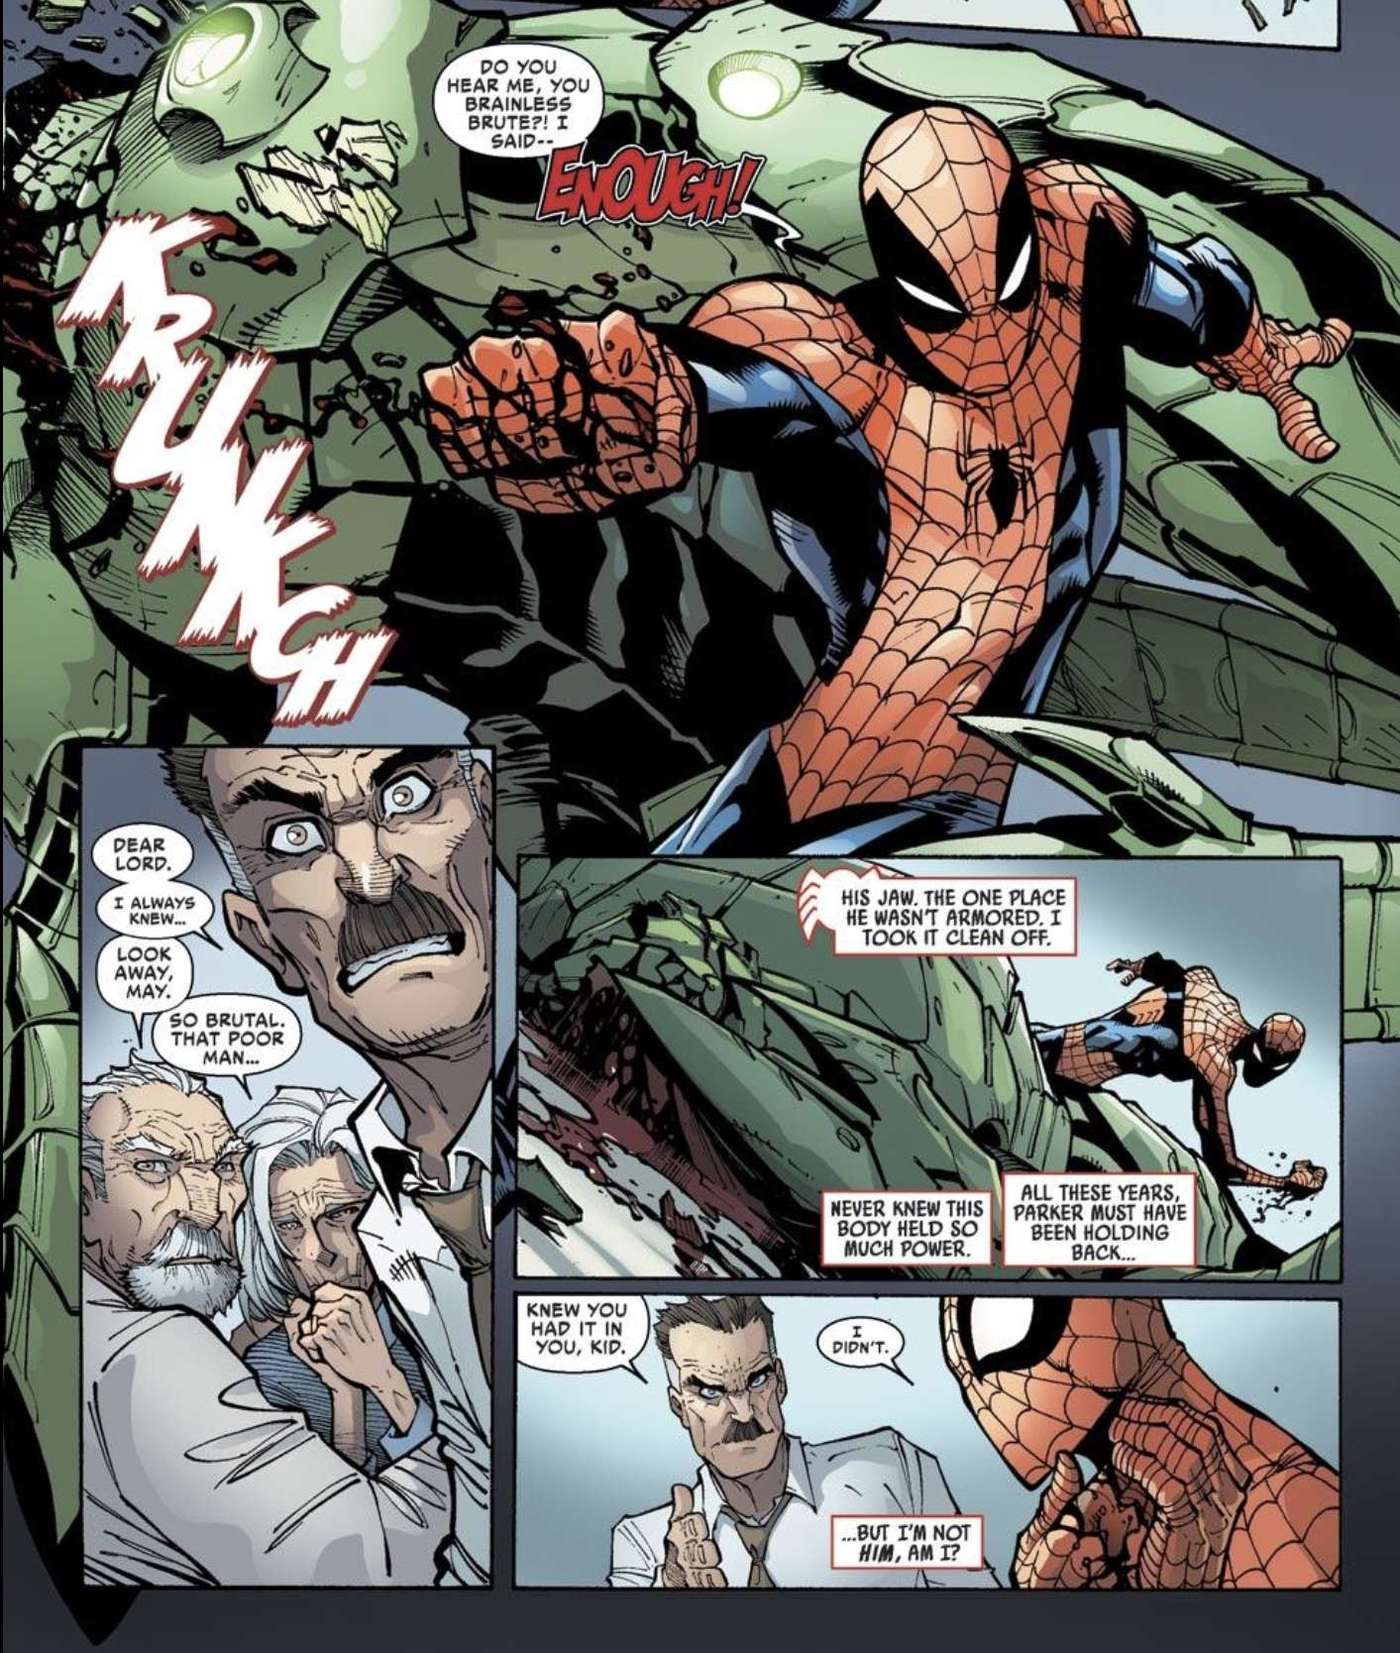 Be Careful What You Wish For When Doc Ock Became Spider Man